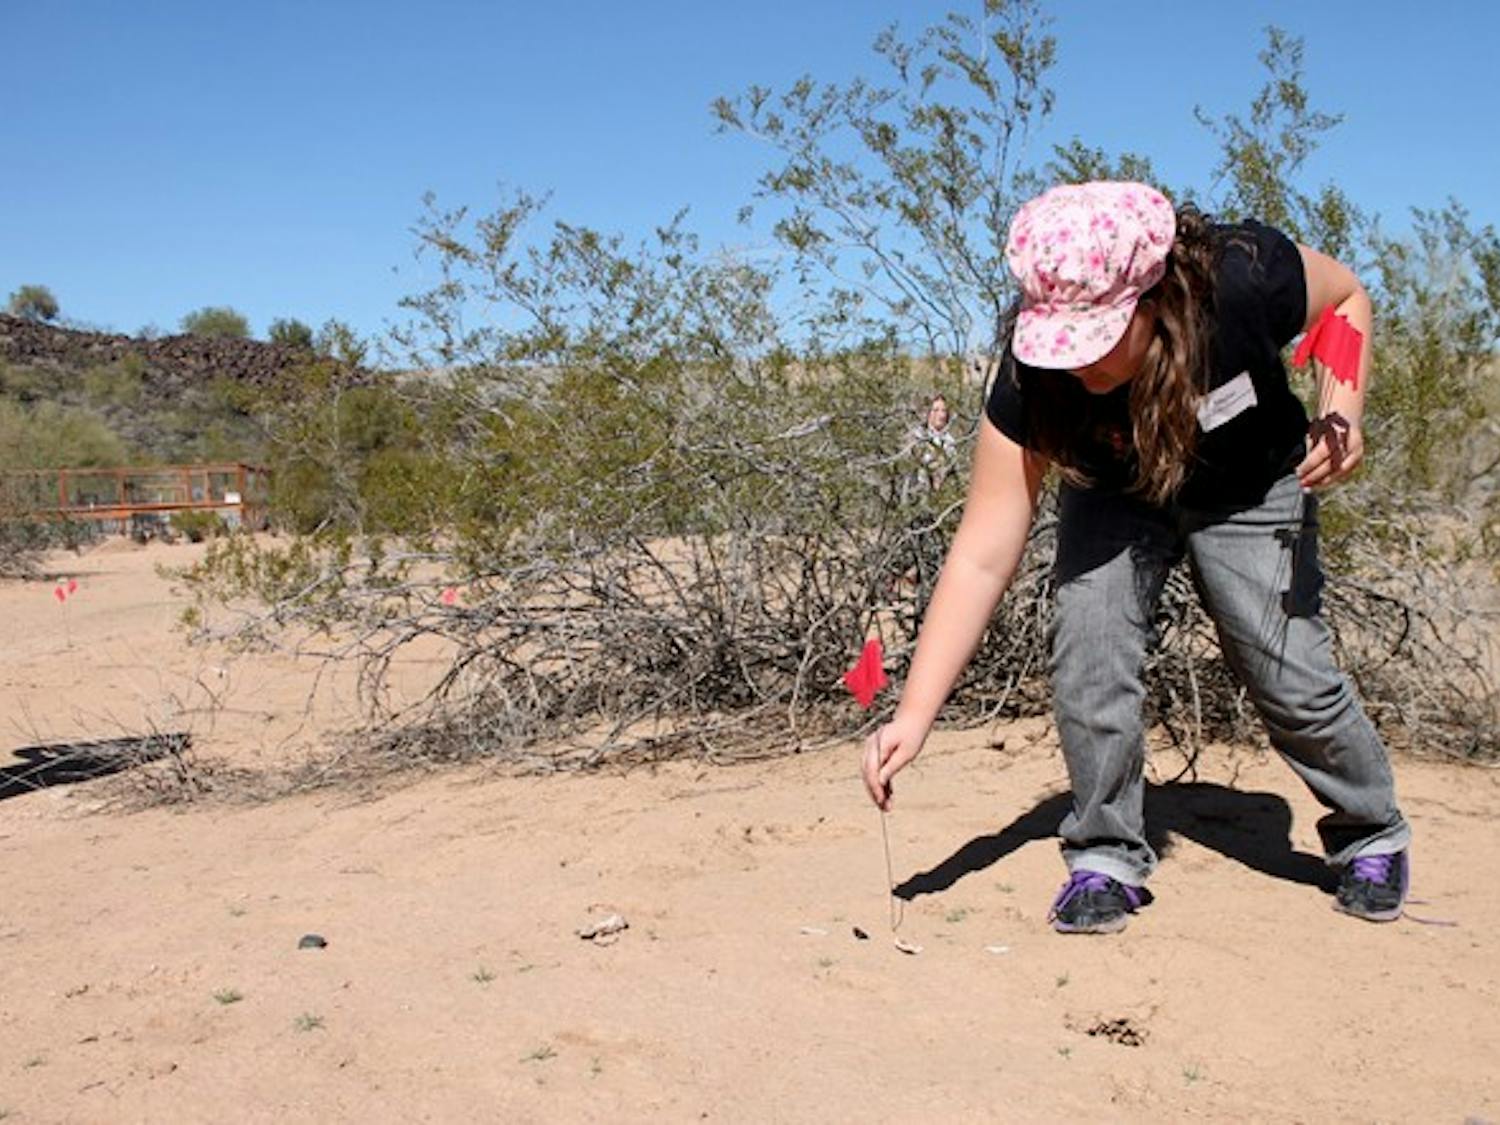 Slideshow: ASU rock art center gives kids chance to be archaeologists for a day